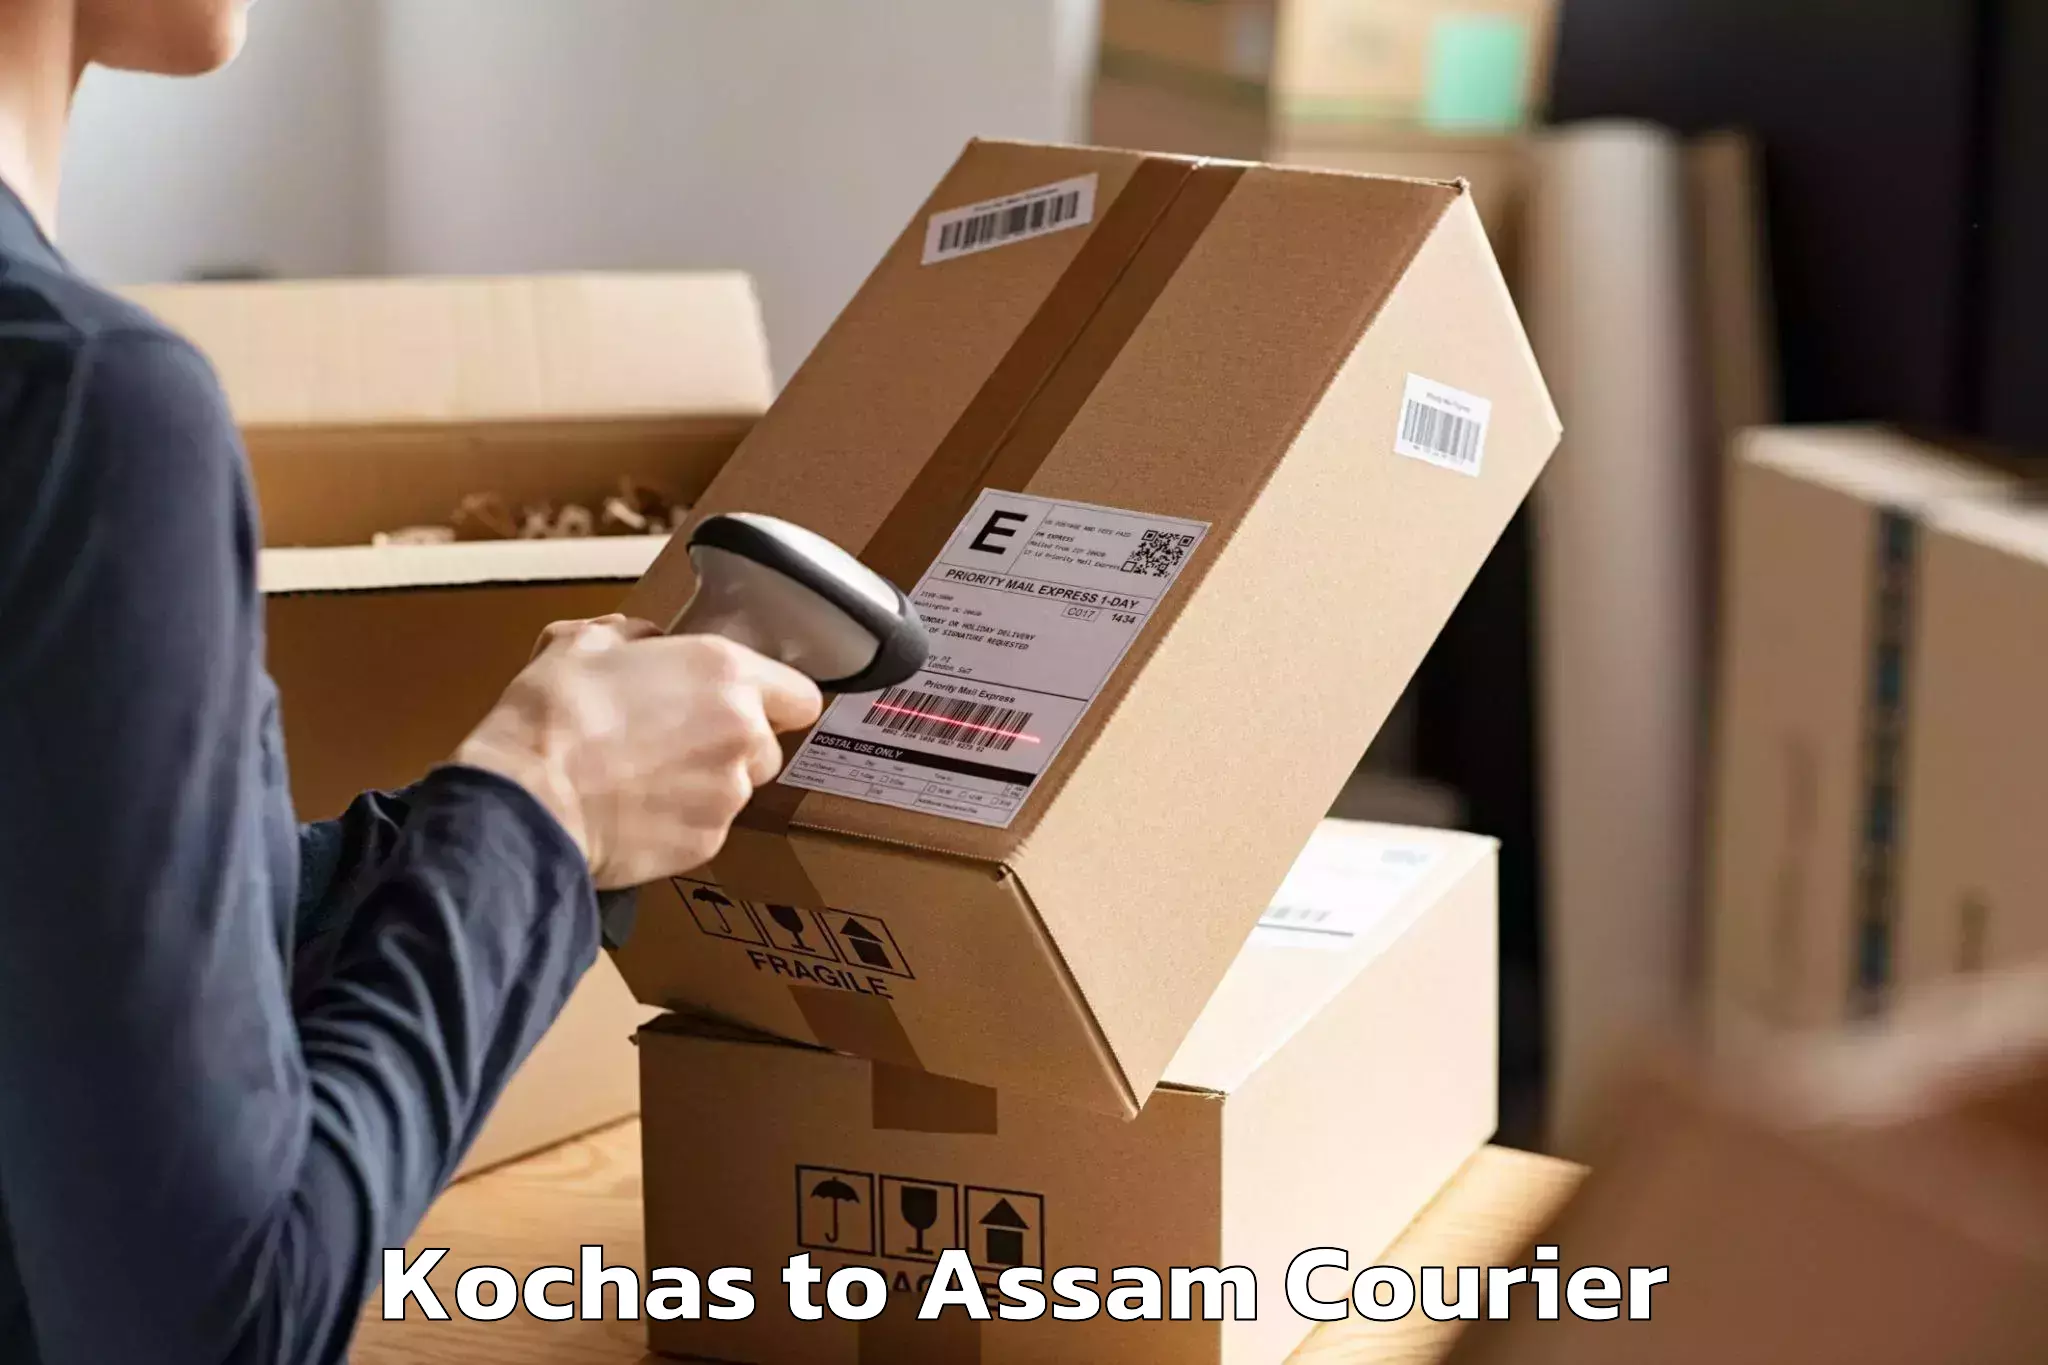 Moving and packing experts Kochas to Assam